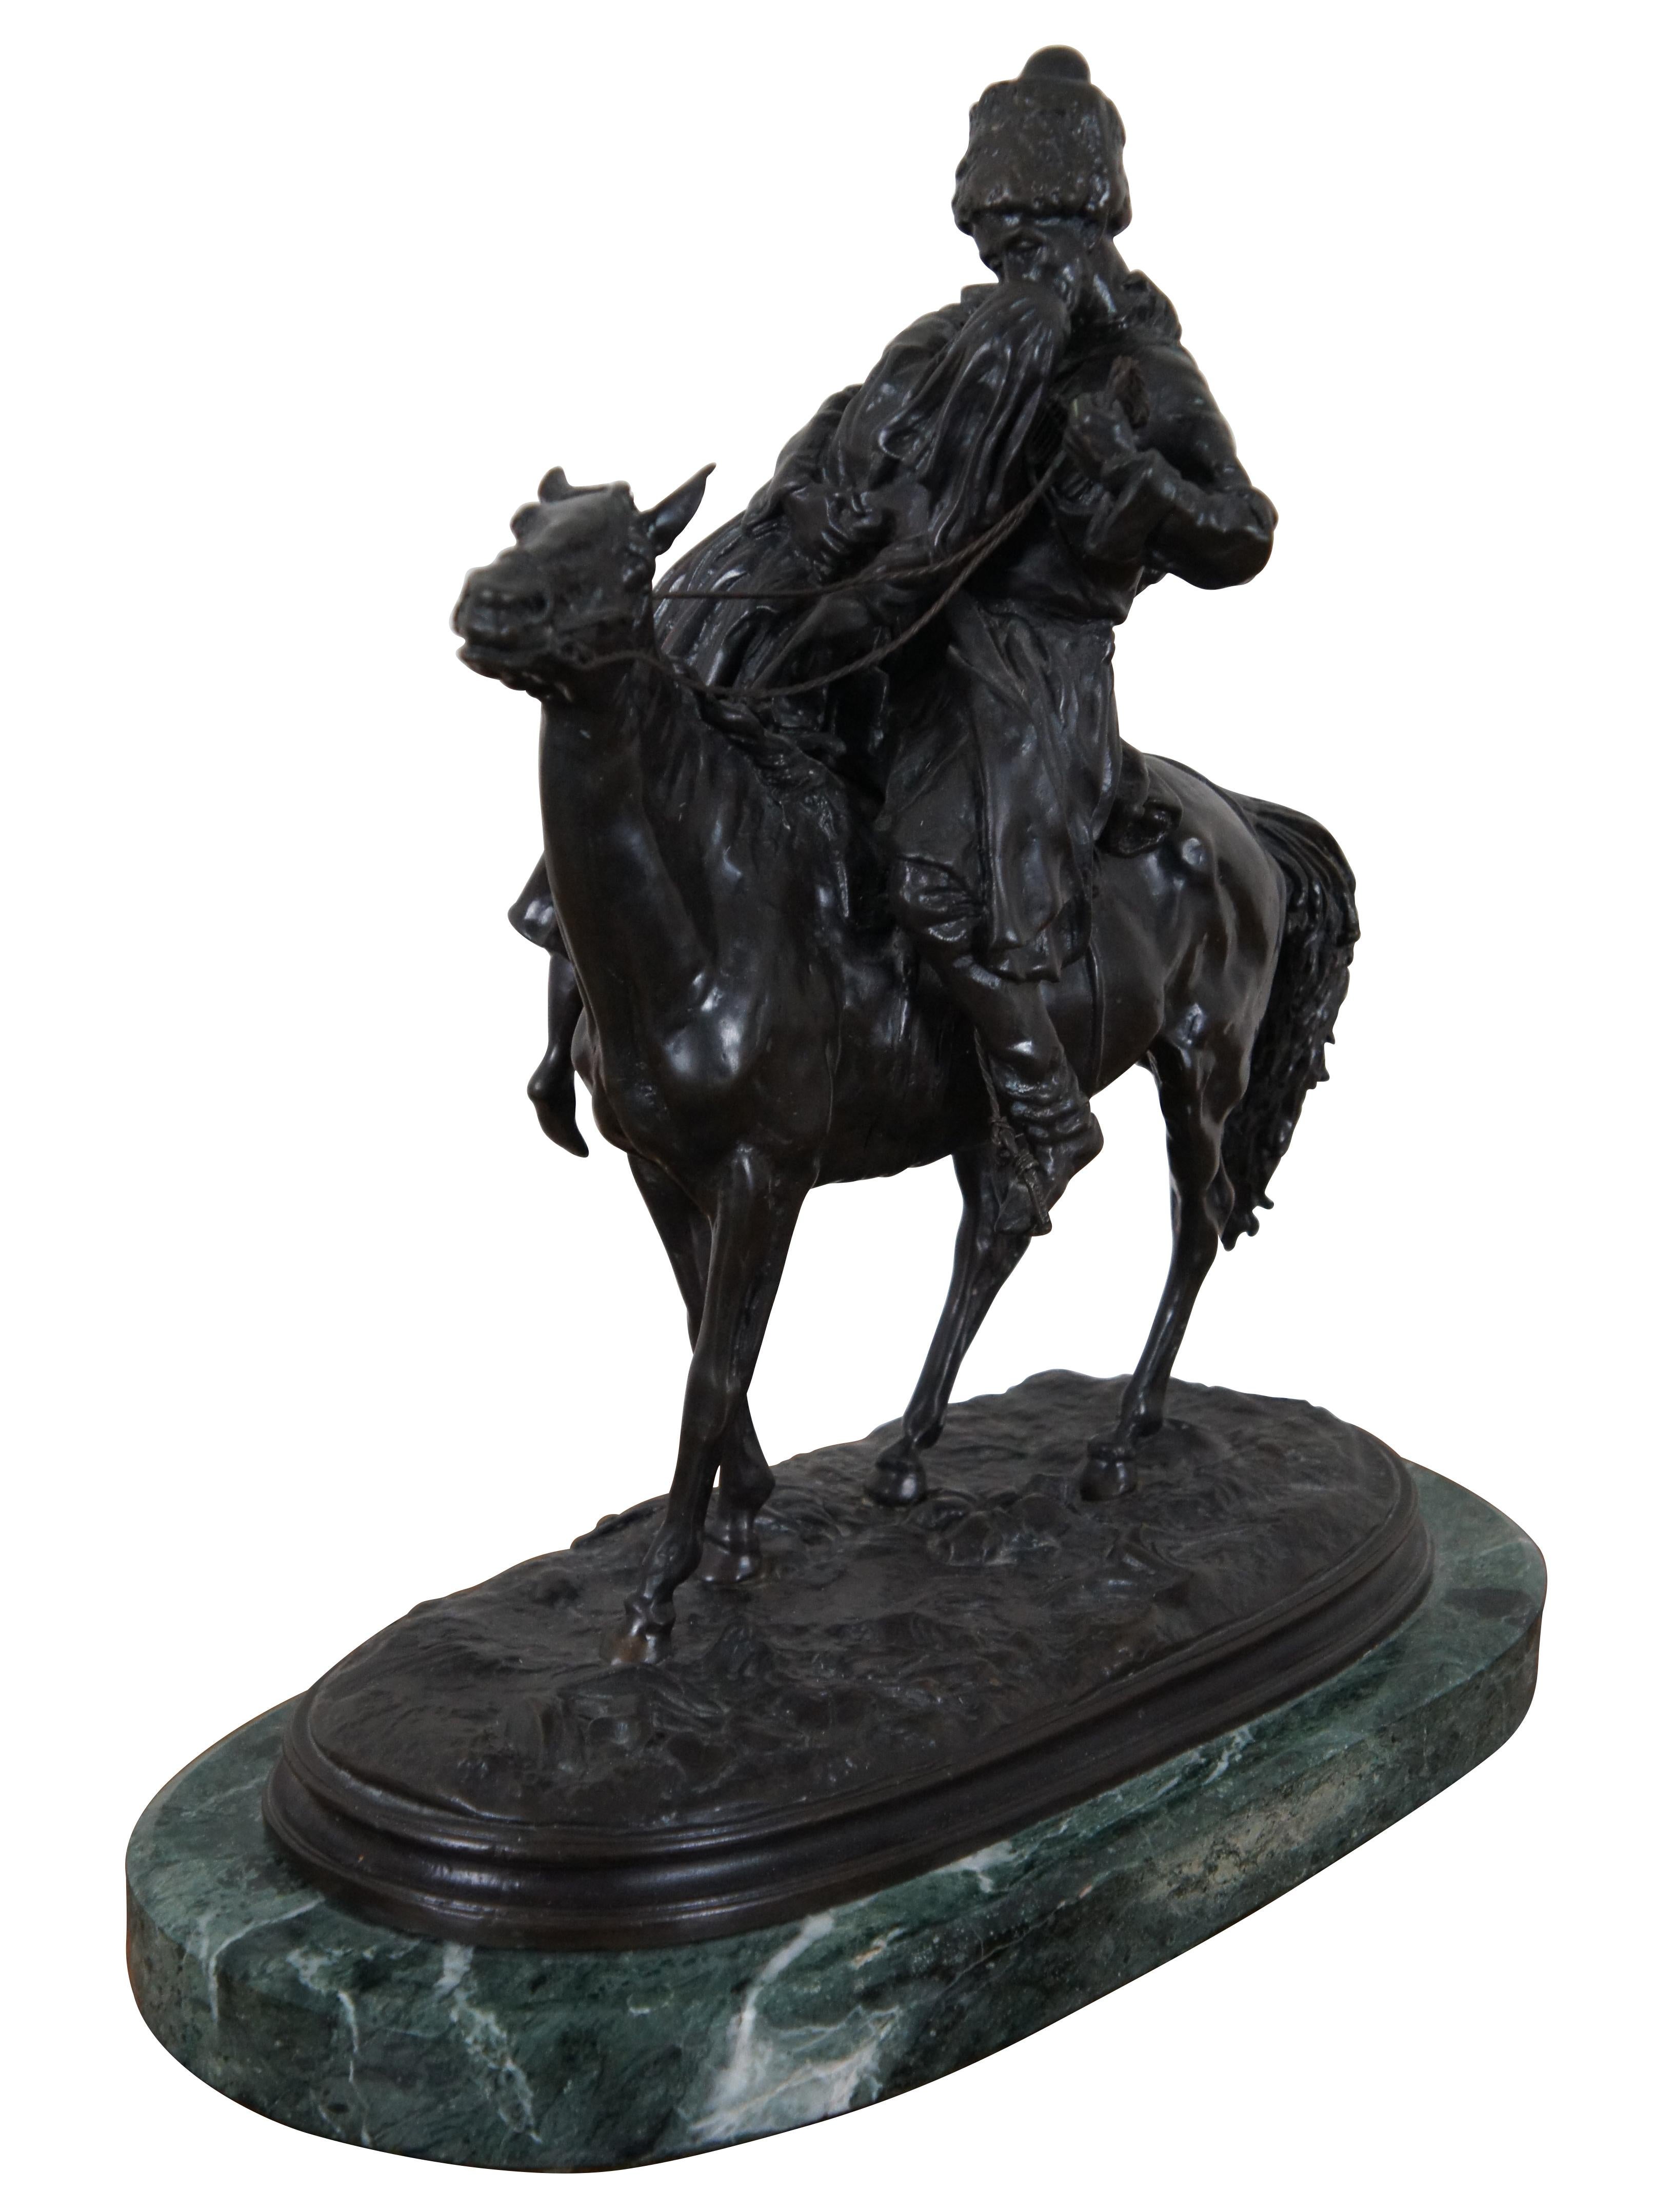 Antique bronze sculpture from a design by Eugene Lanceray, showing an equestrian scene with a Russian / Cossack soldier seated on a horse, giving his lover / wife a kiss goodbye. Signed in Cyrillic along one edge. Foundry mark not visible. Mounted